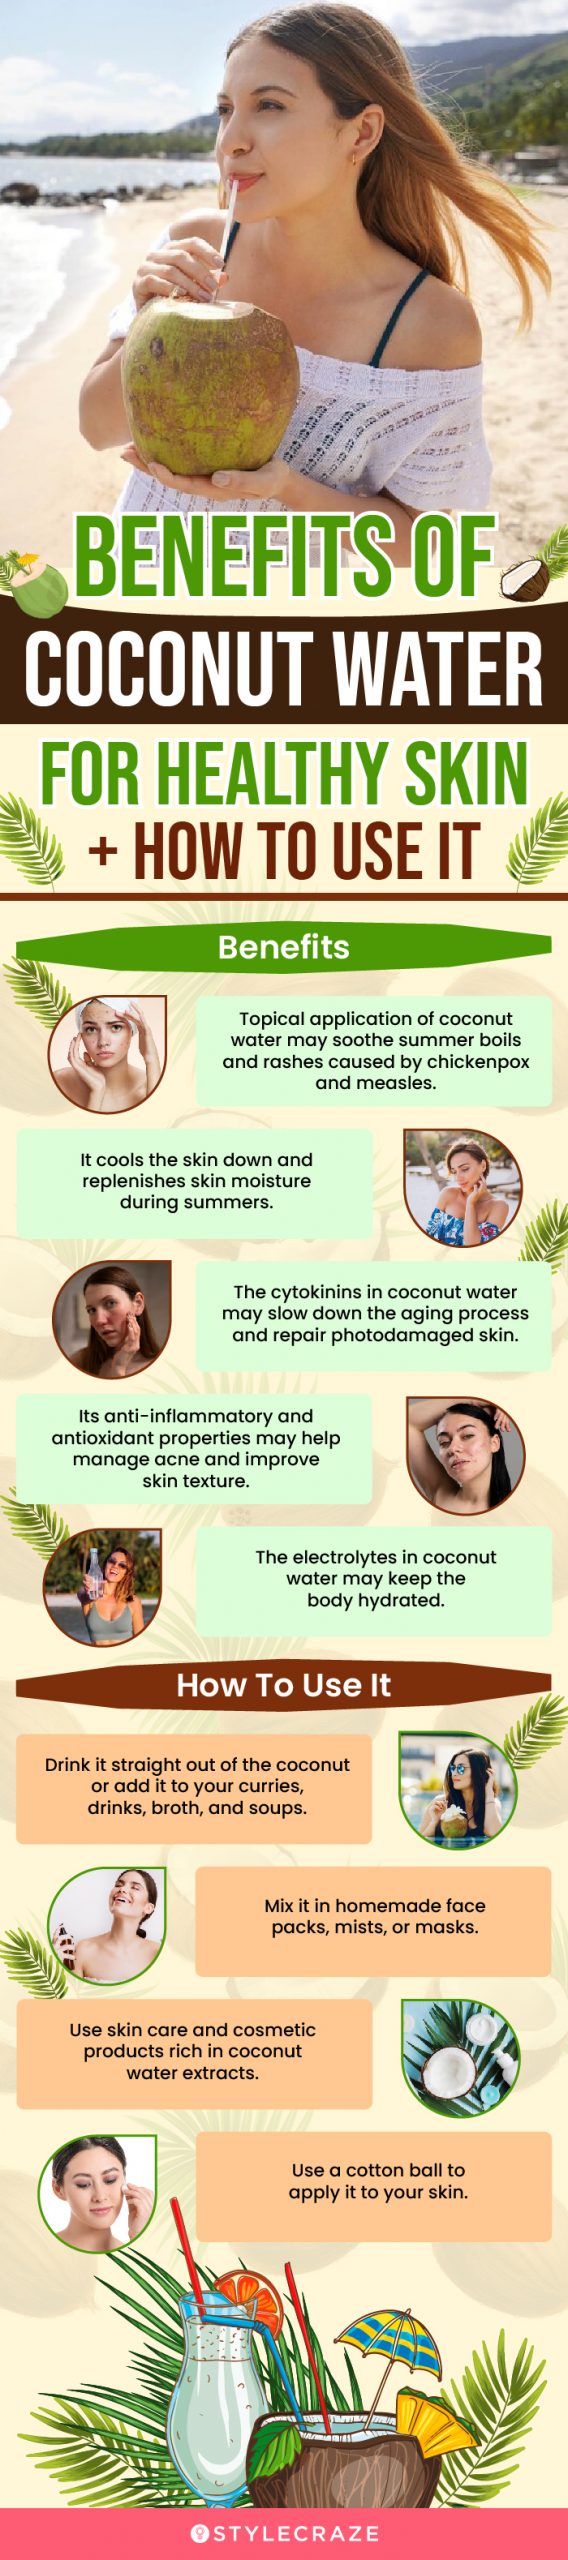 benefits and how to use coconut water for healthy skin (infographic)